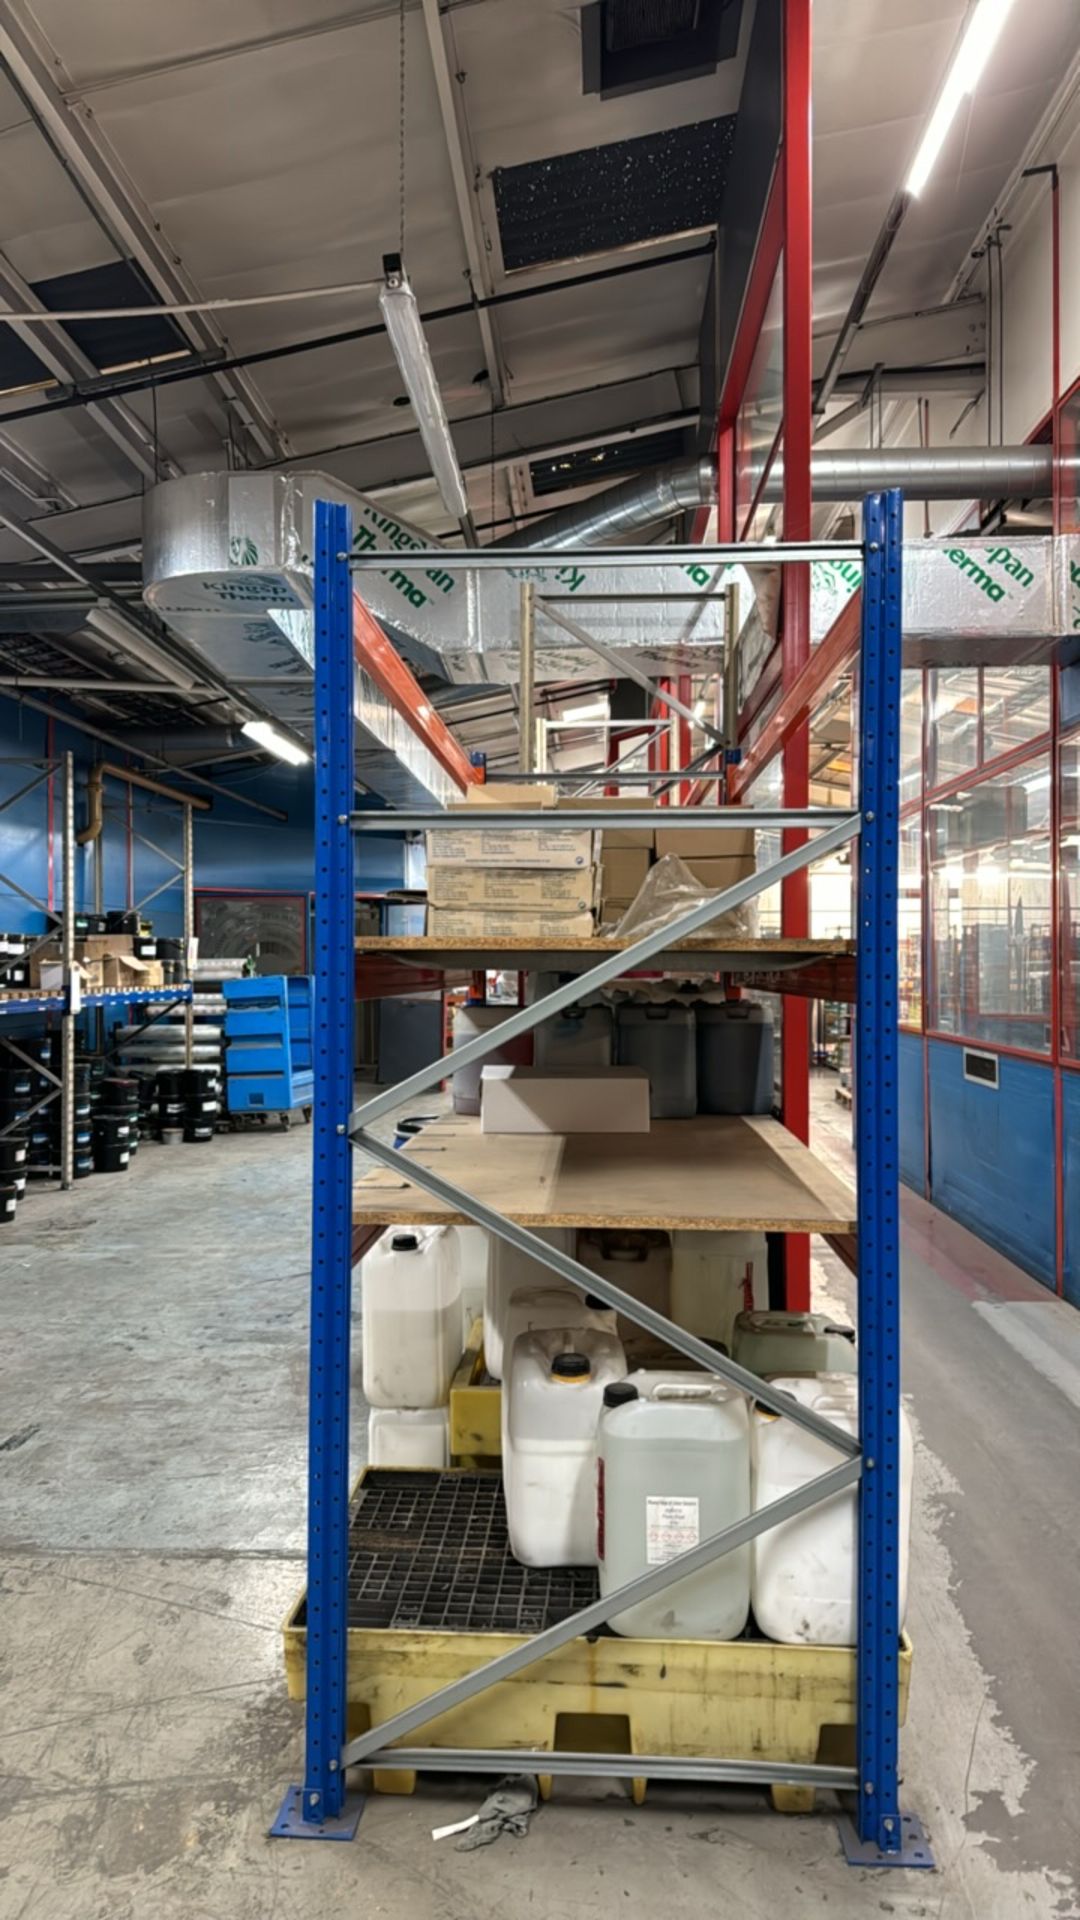 7 Bays of Boltless Pallet Racking - Image 6 of 6